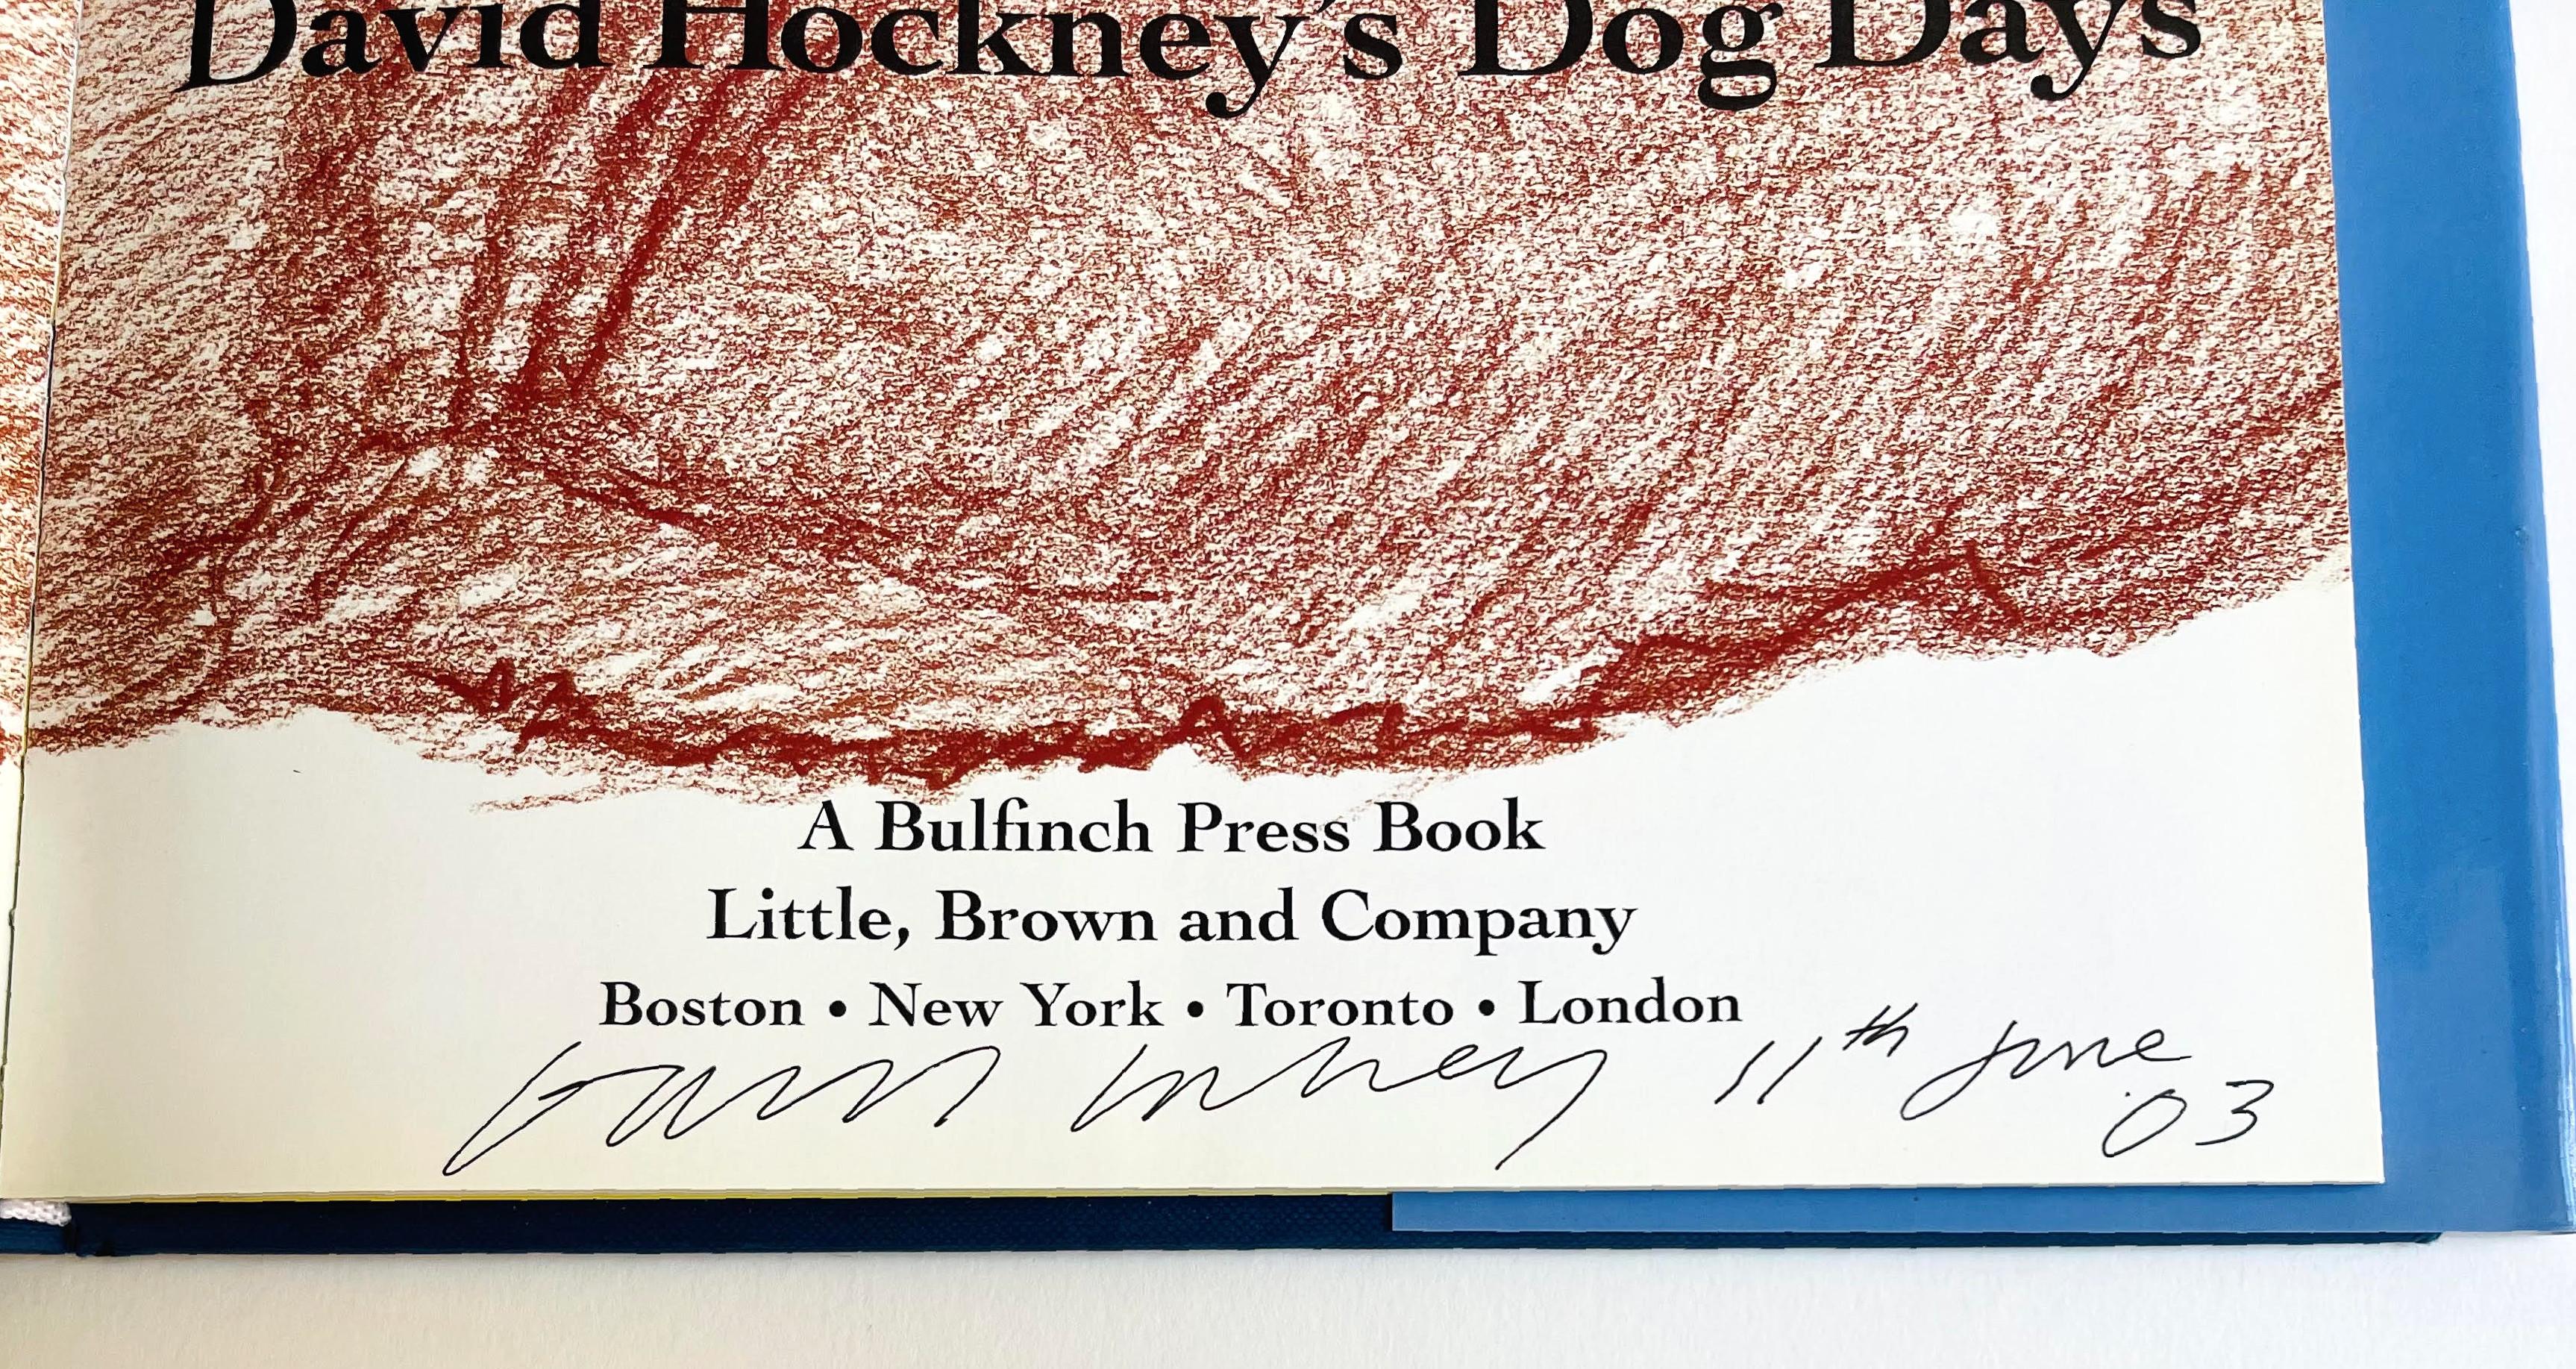 David Hockney's Dog Days (hand signed and dated by David Hockney), 1998
Hardback monograph with dust jacket (hand signed and dated by David Hockney)
Hand signed and dated 